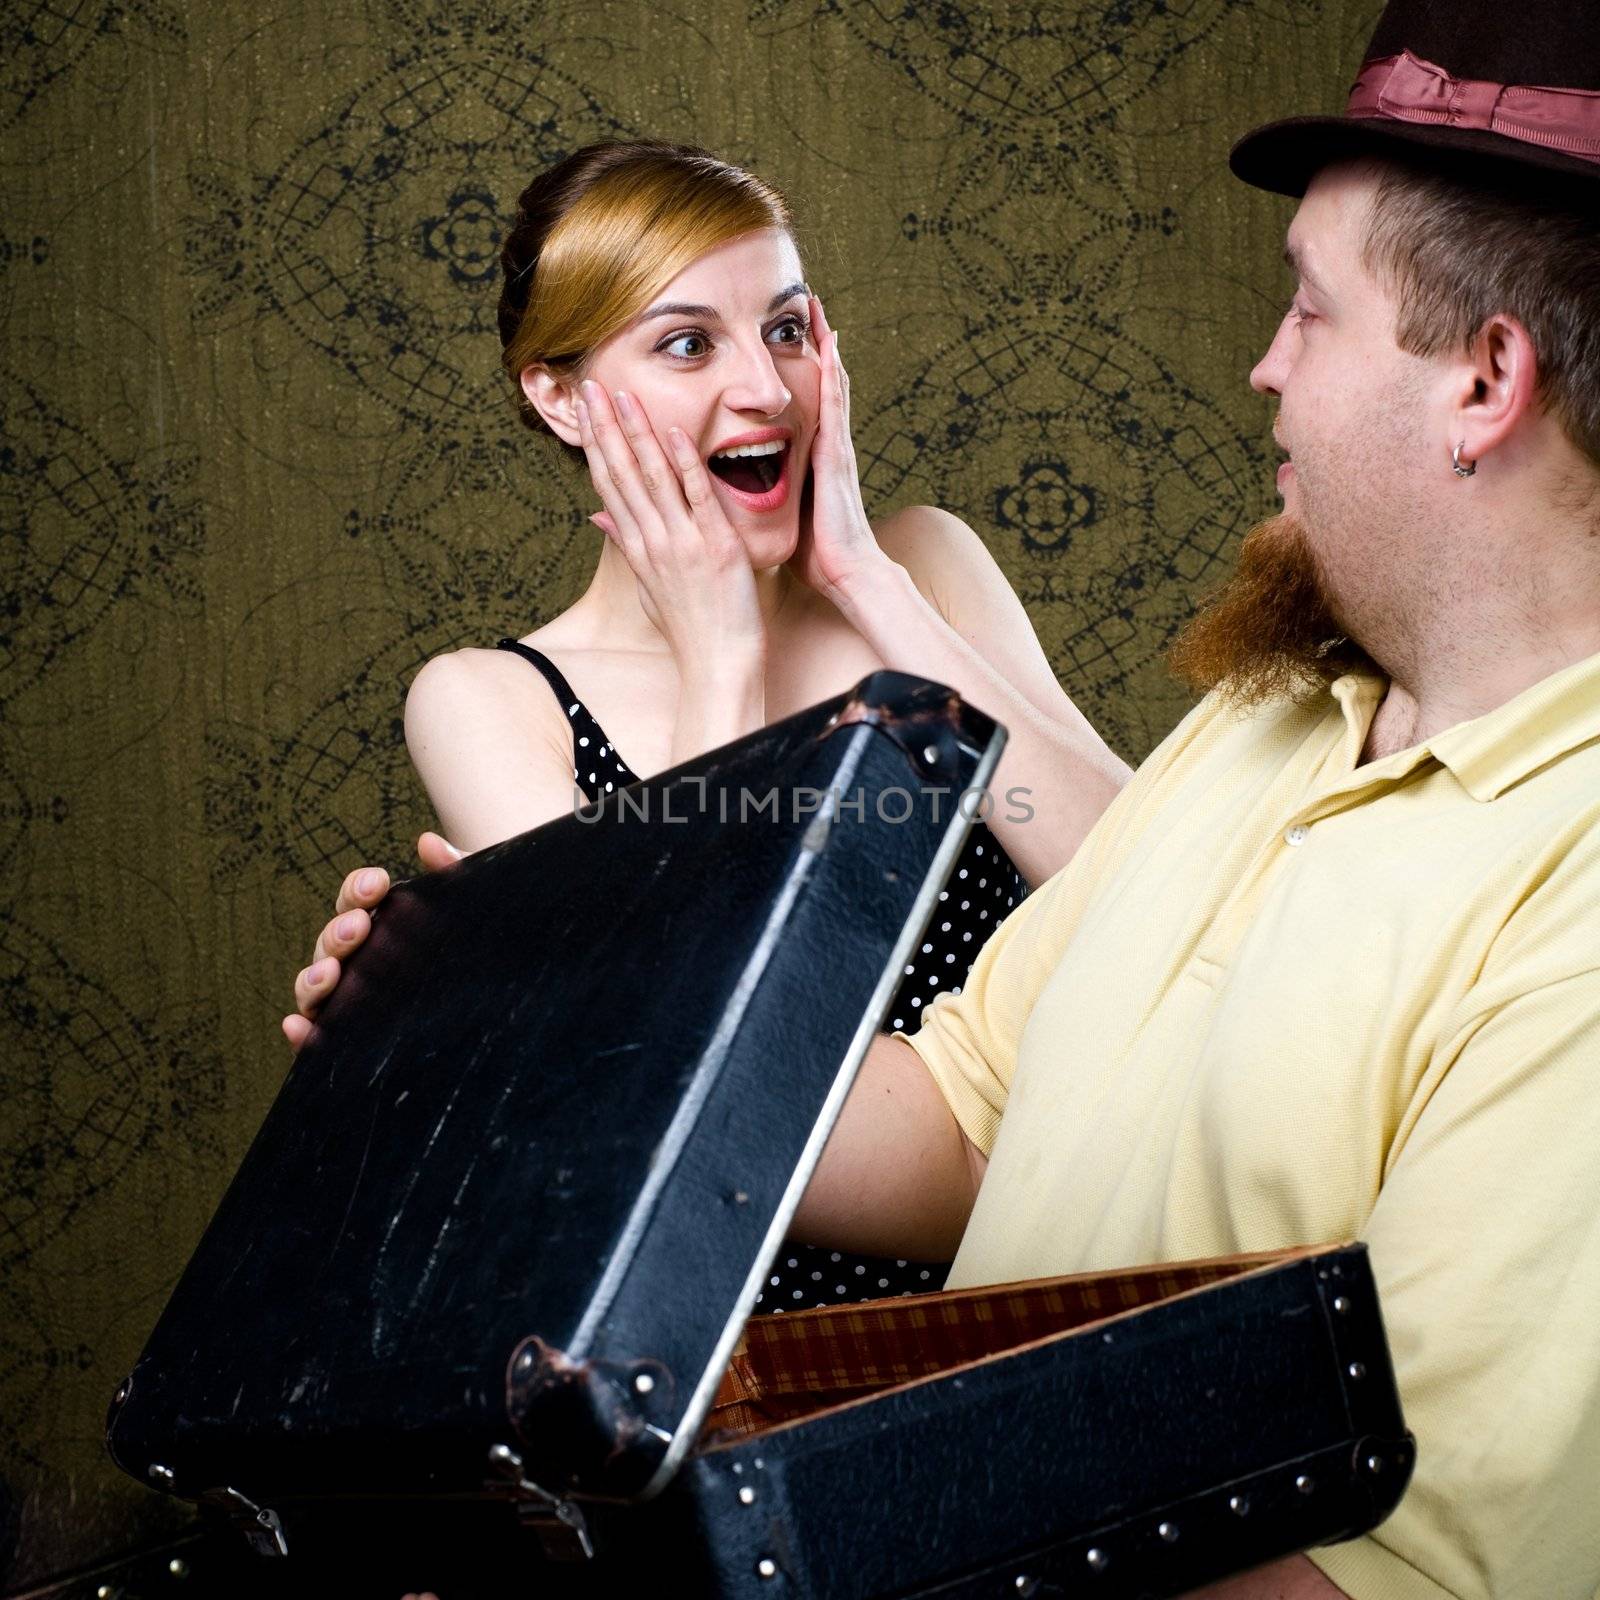 An image of a woman and a man with a valise